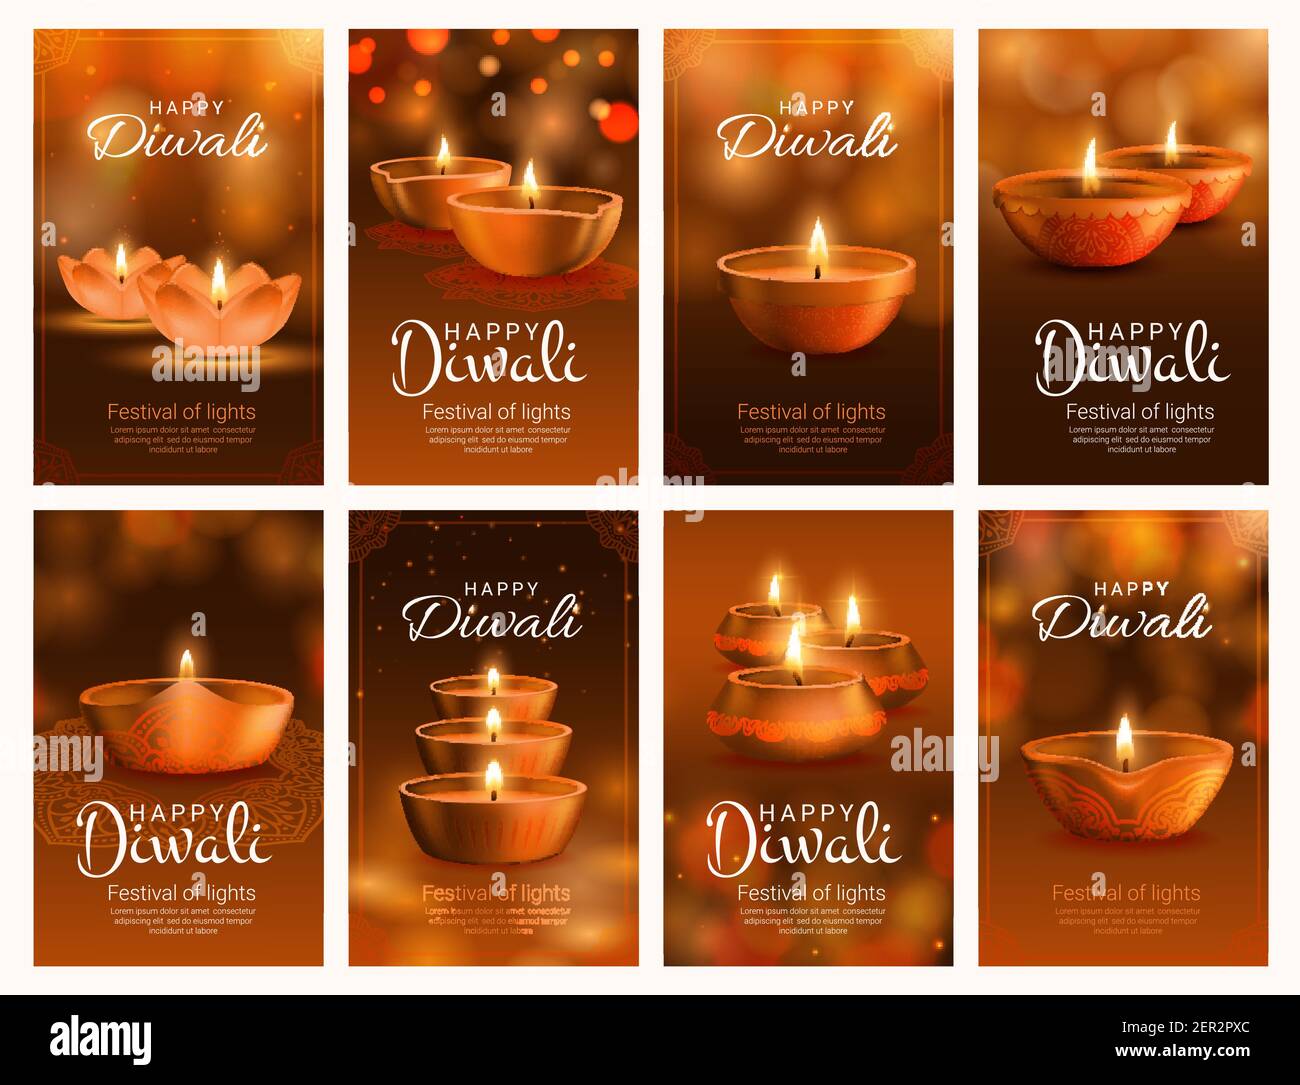 Diwali festival of light vector banners with diya lamps. Indian Hindu religion holiday oil lamps with fire flames greeting cards with rangoli decorati Stock Vector